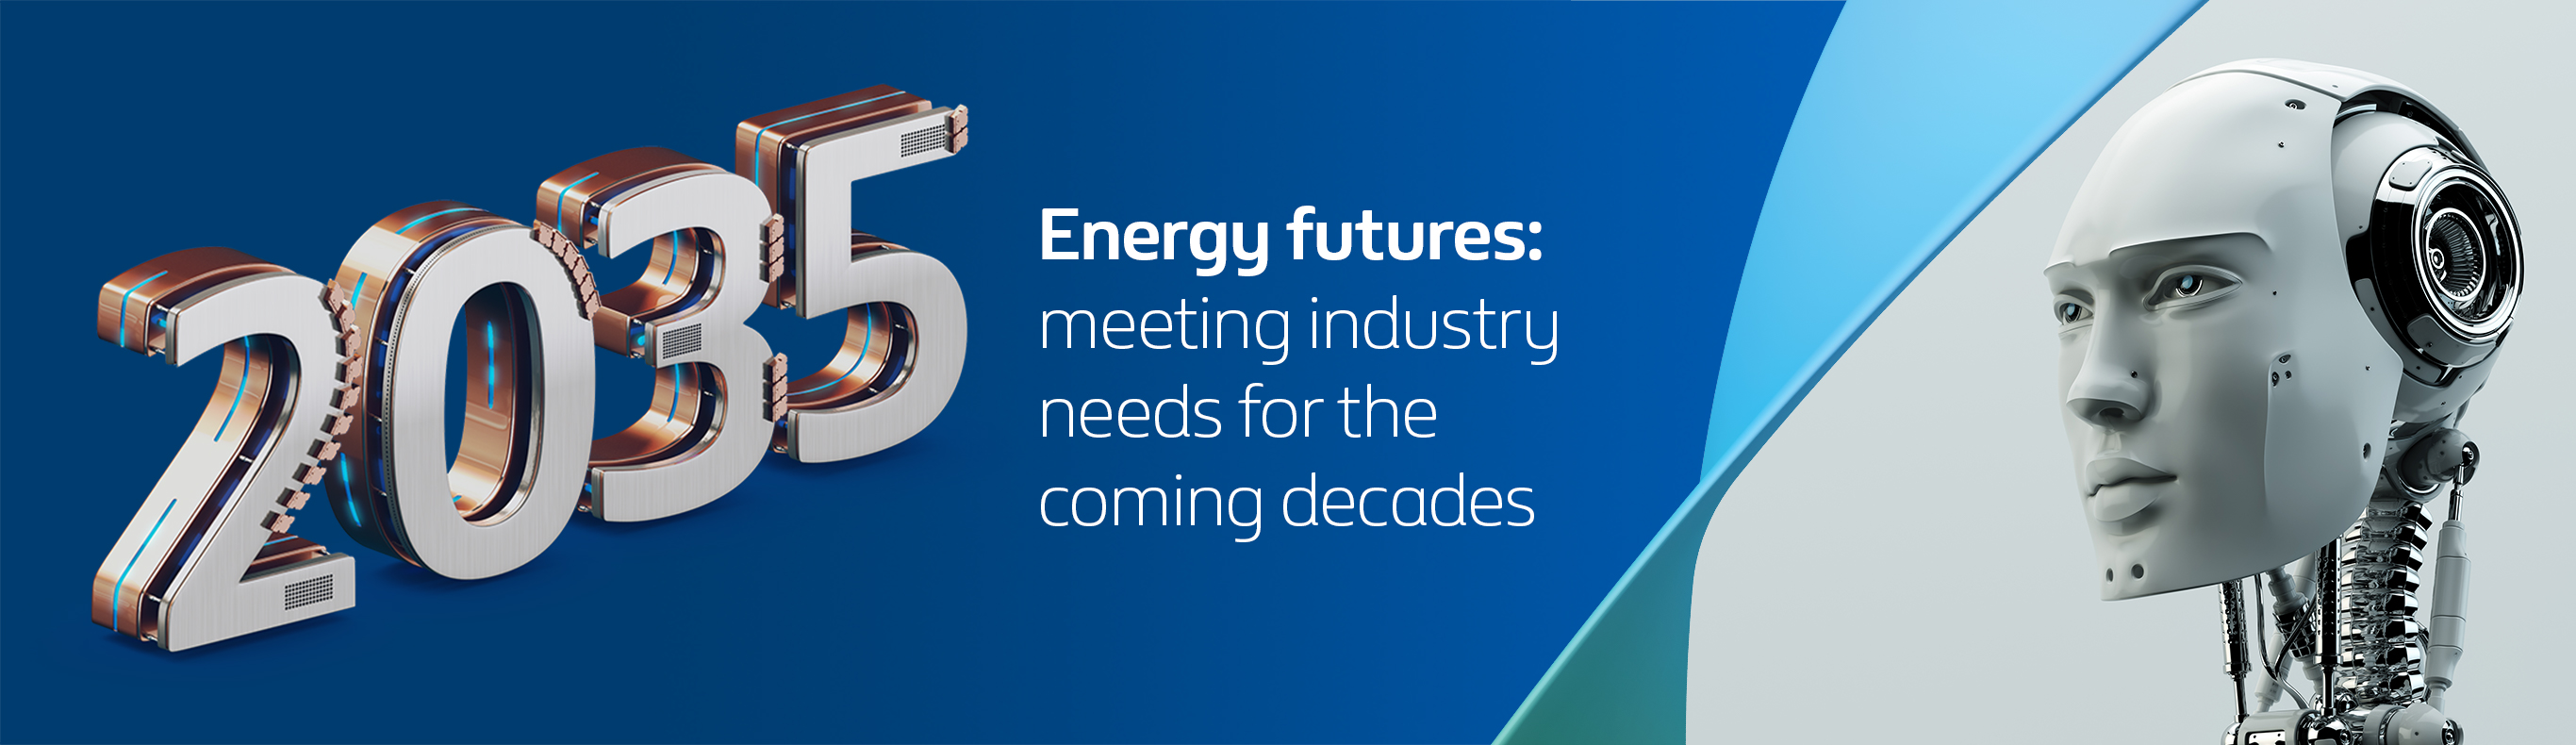 2035 Energy futures:meeting industry needs for the coming decades